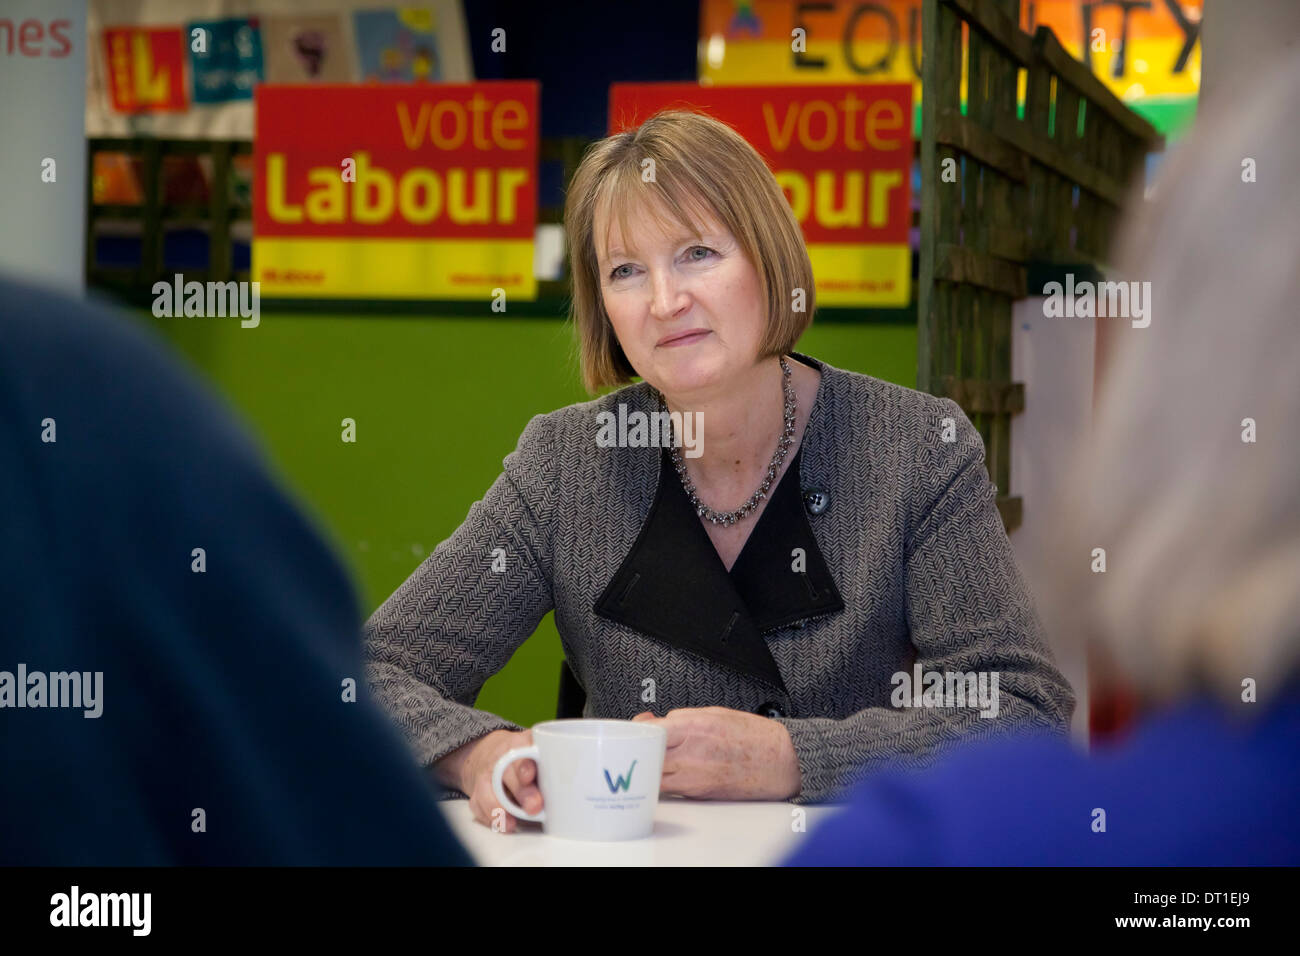 Harriet Harman Deputy Leader of the Labour party in Wythenshawe, Manchester, February 2014 Stock Photo